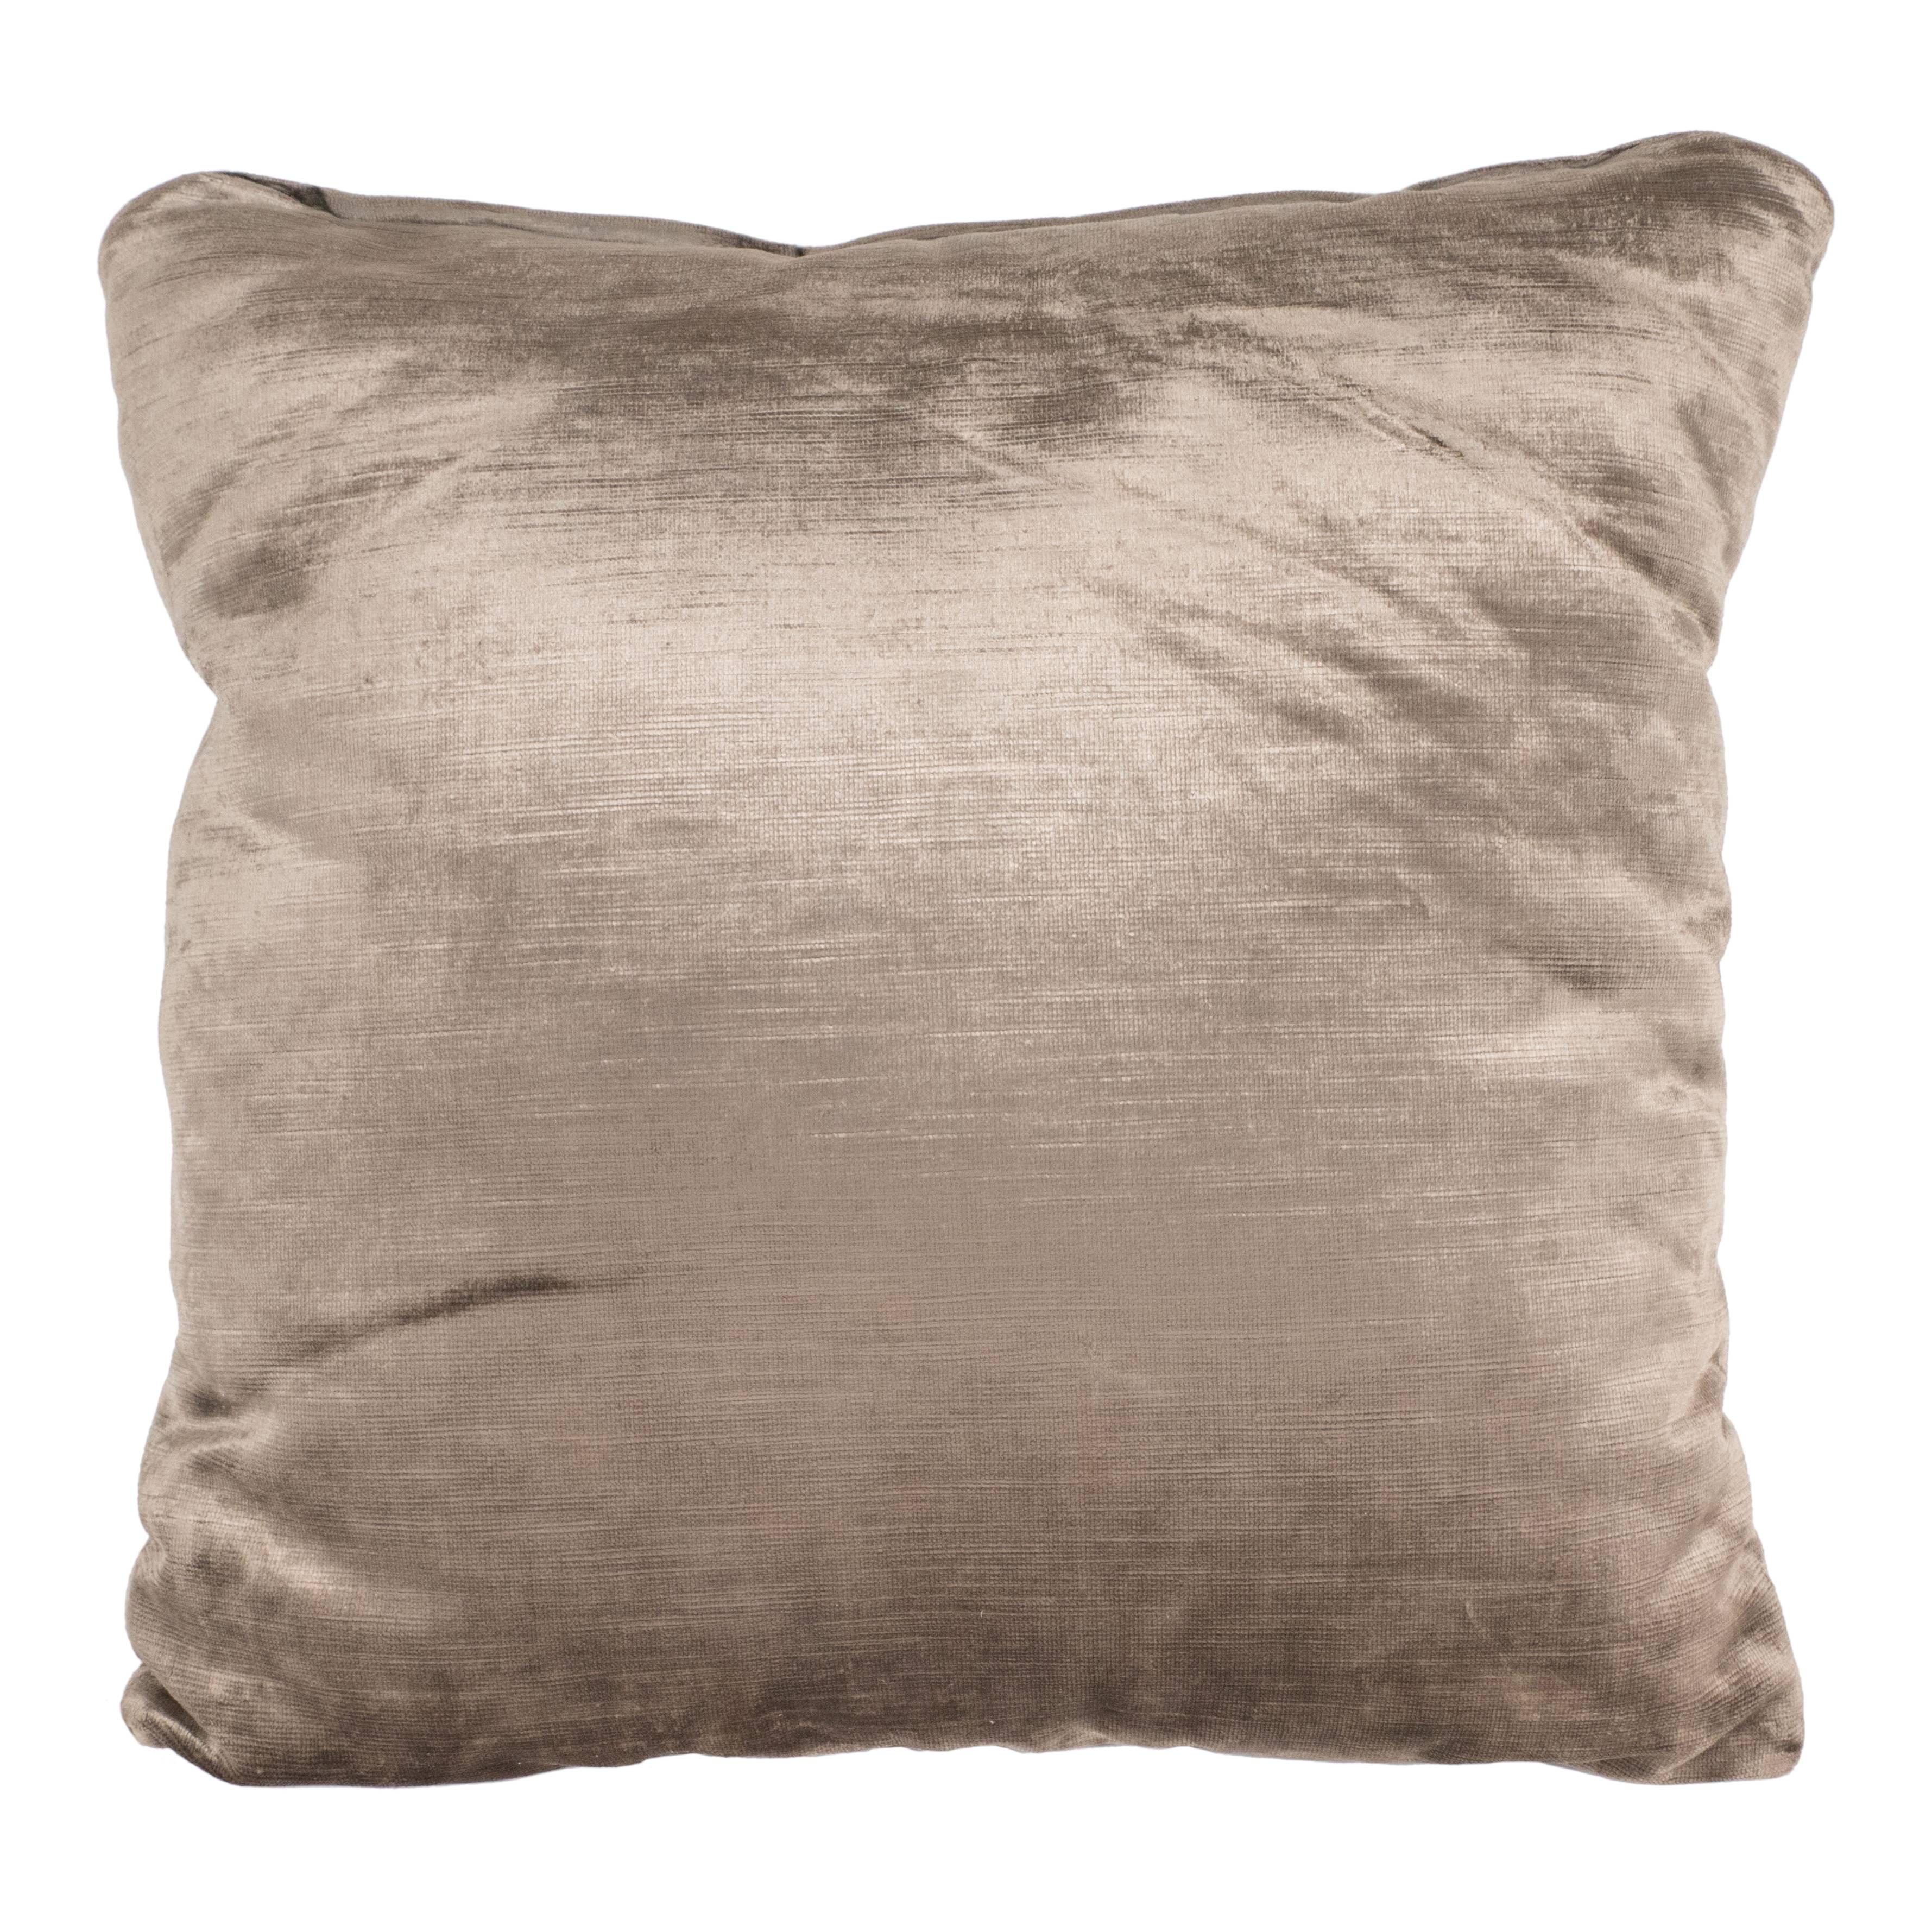 Sophisticated Square Velvet Pillow in Rich Smoked Taupe